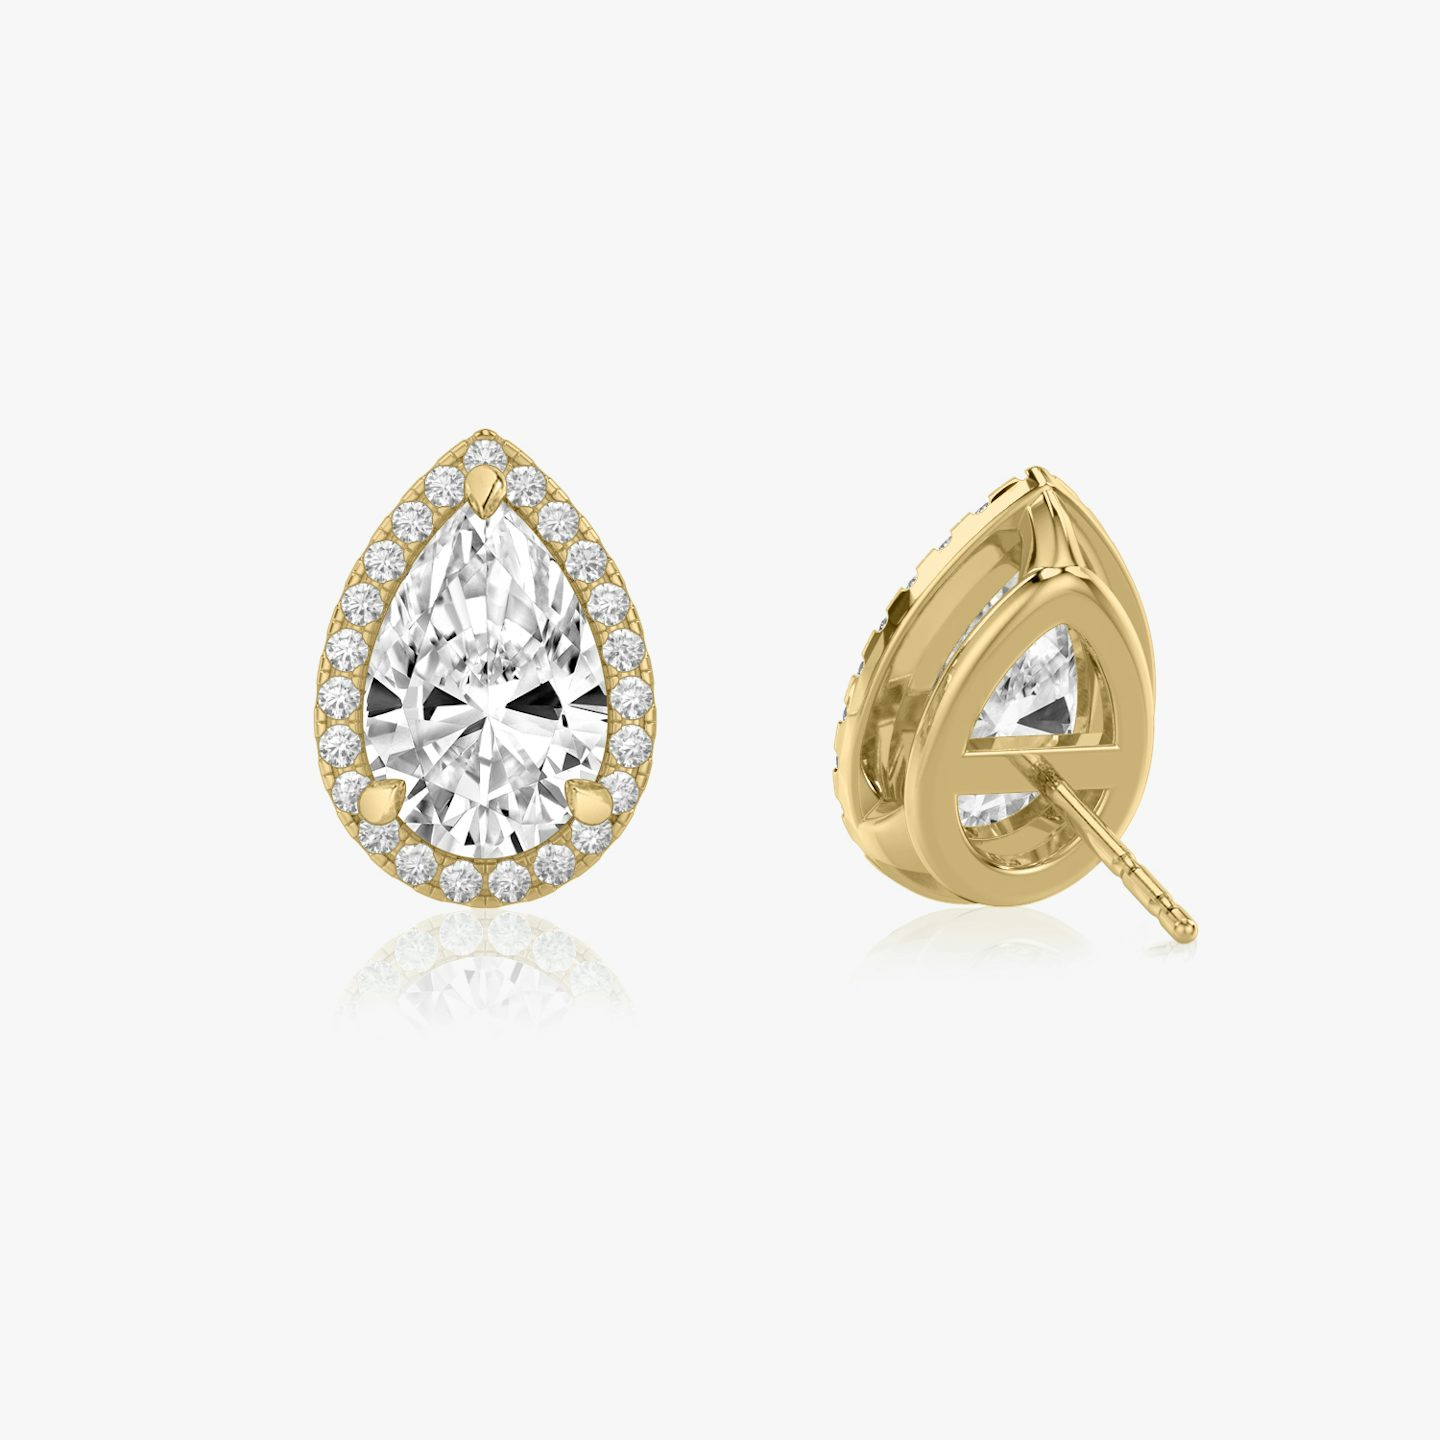 undefined | Poire | 14k | Or jaune | caratWeight: other